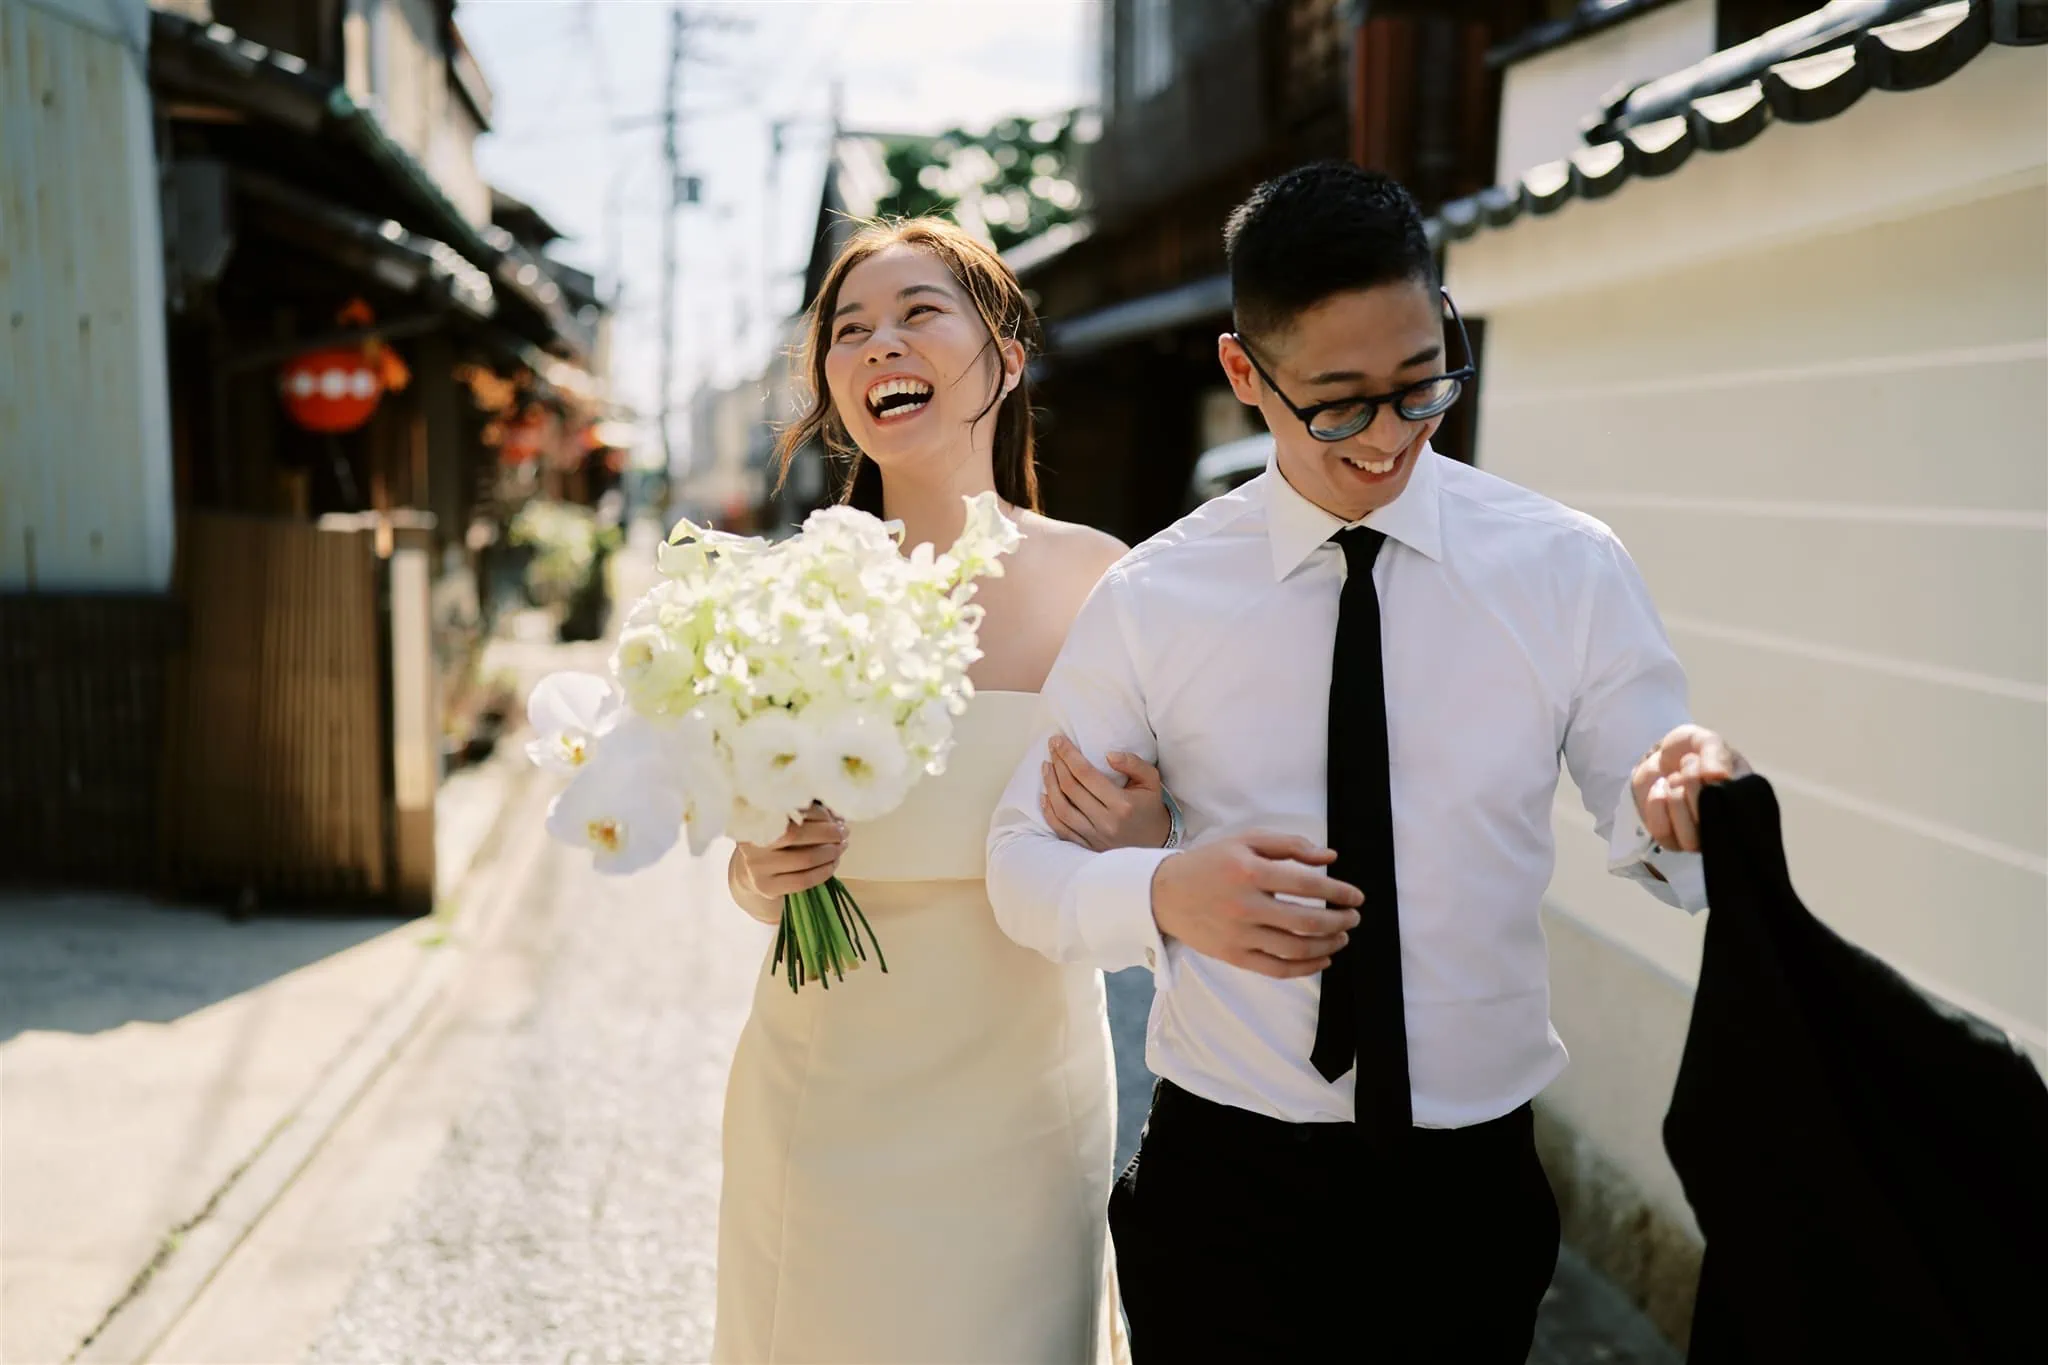 Kyoto Tokyo Japan Elopement Wedding Photographer, Planner & Videographer | A joyful bride and groom laughing as they elope down a narrow street in Japan.